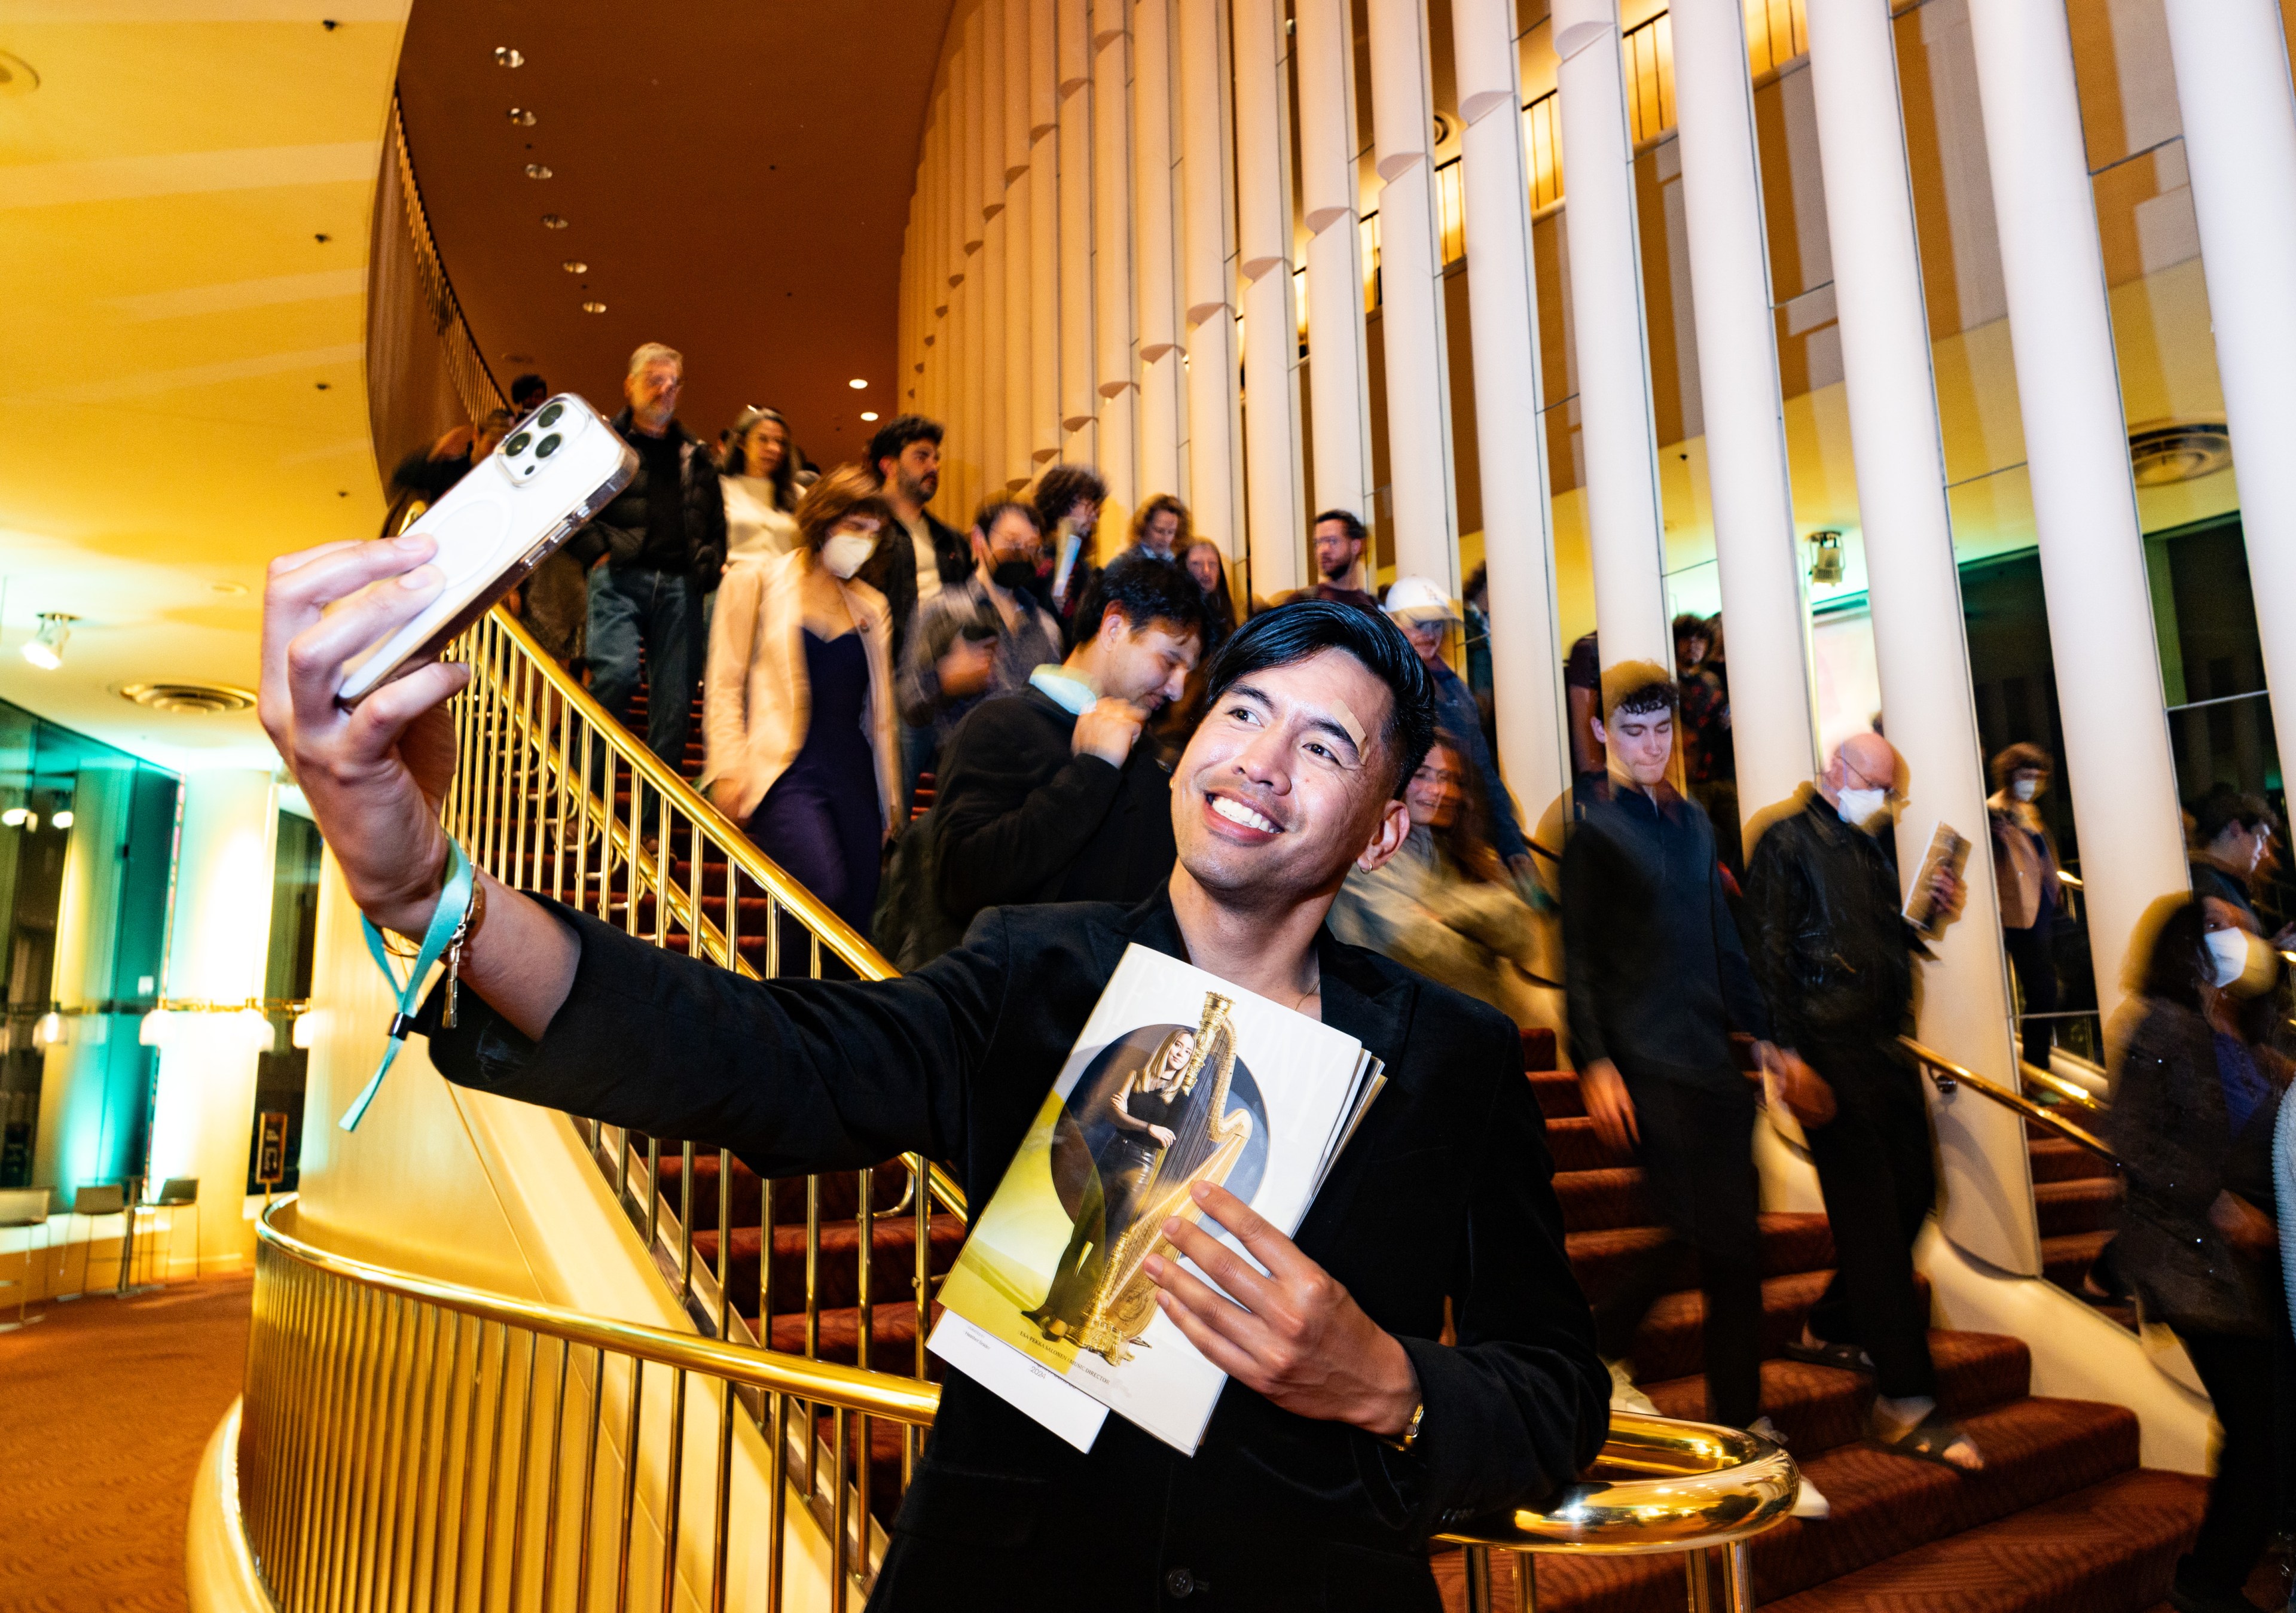 A man is taking a selfie, holding an award and a booklet, smiles on a staircase with people descending in the background.